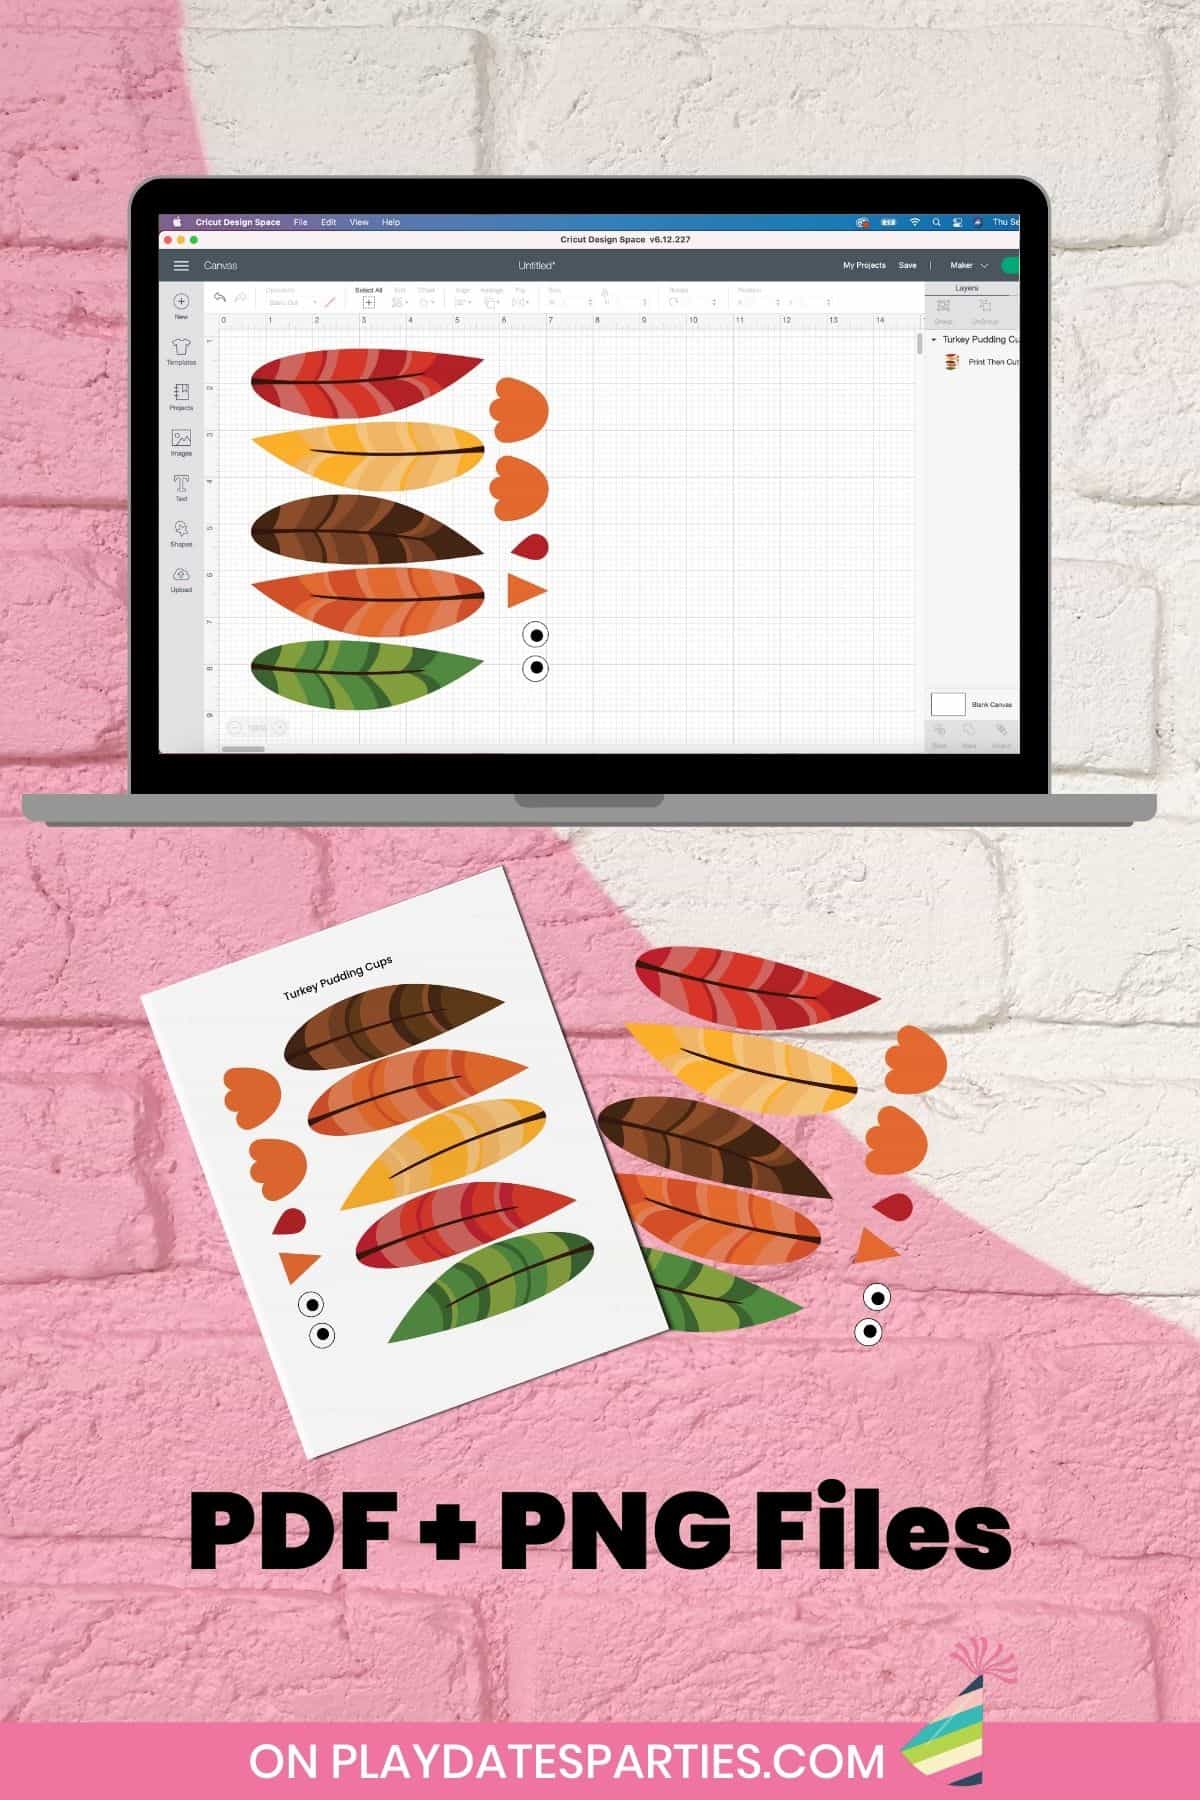 Mockup of printable files, including a design loaded into Cricut design space.